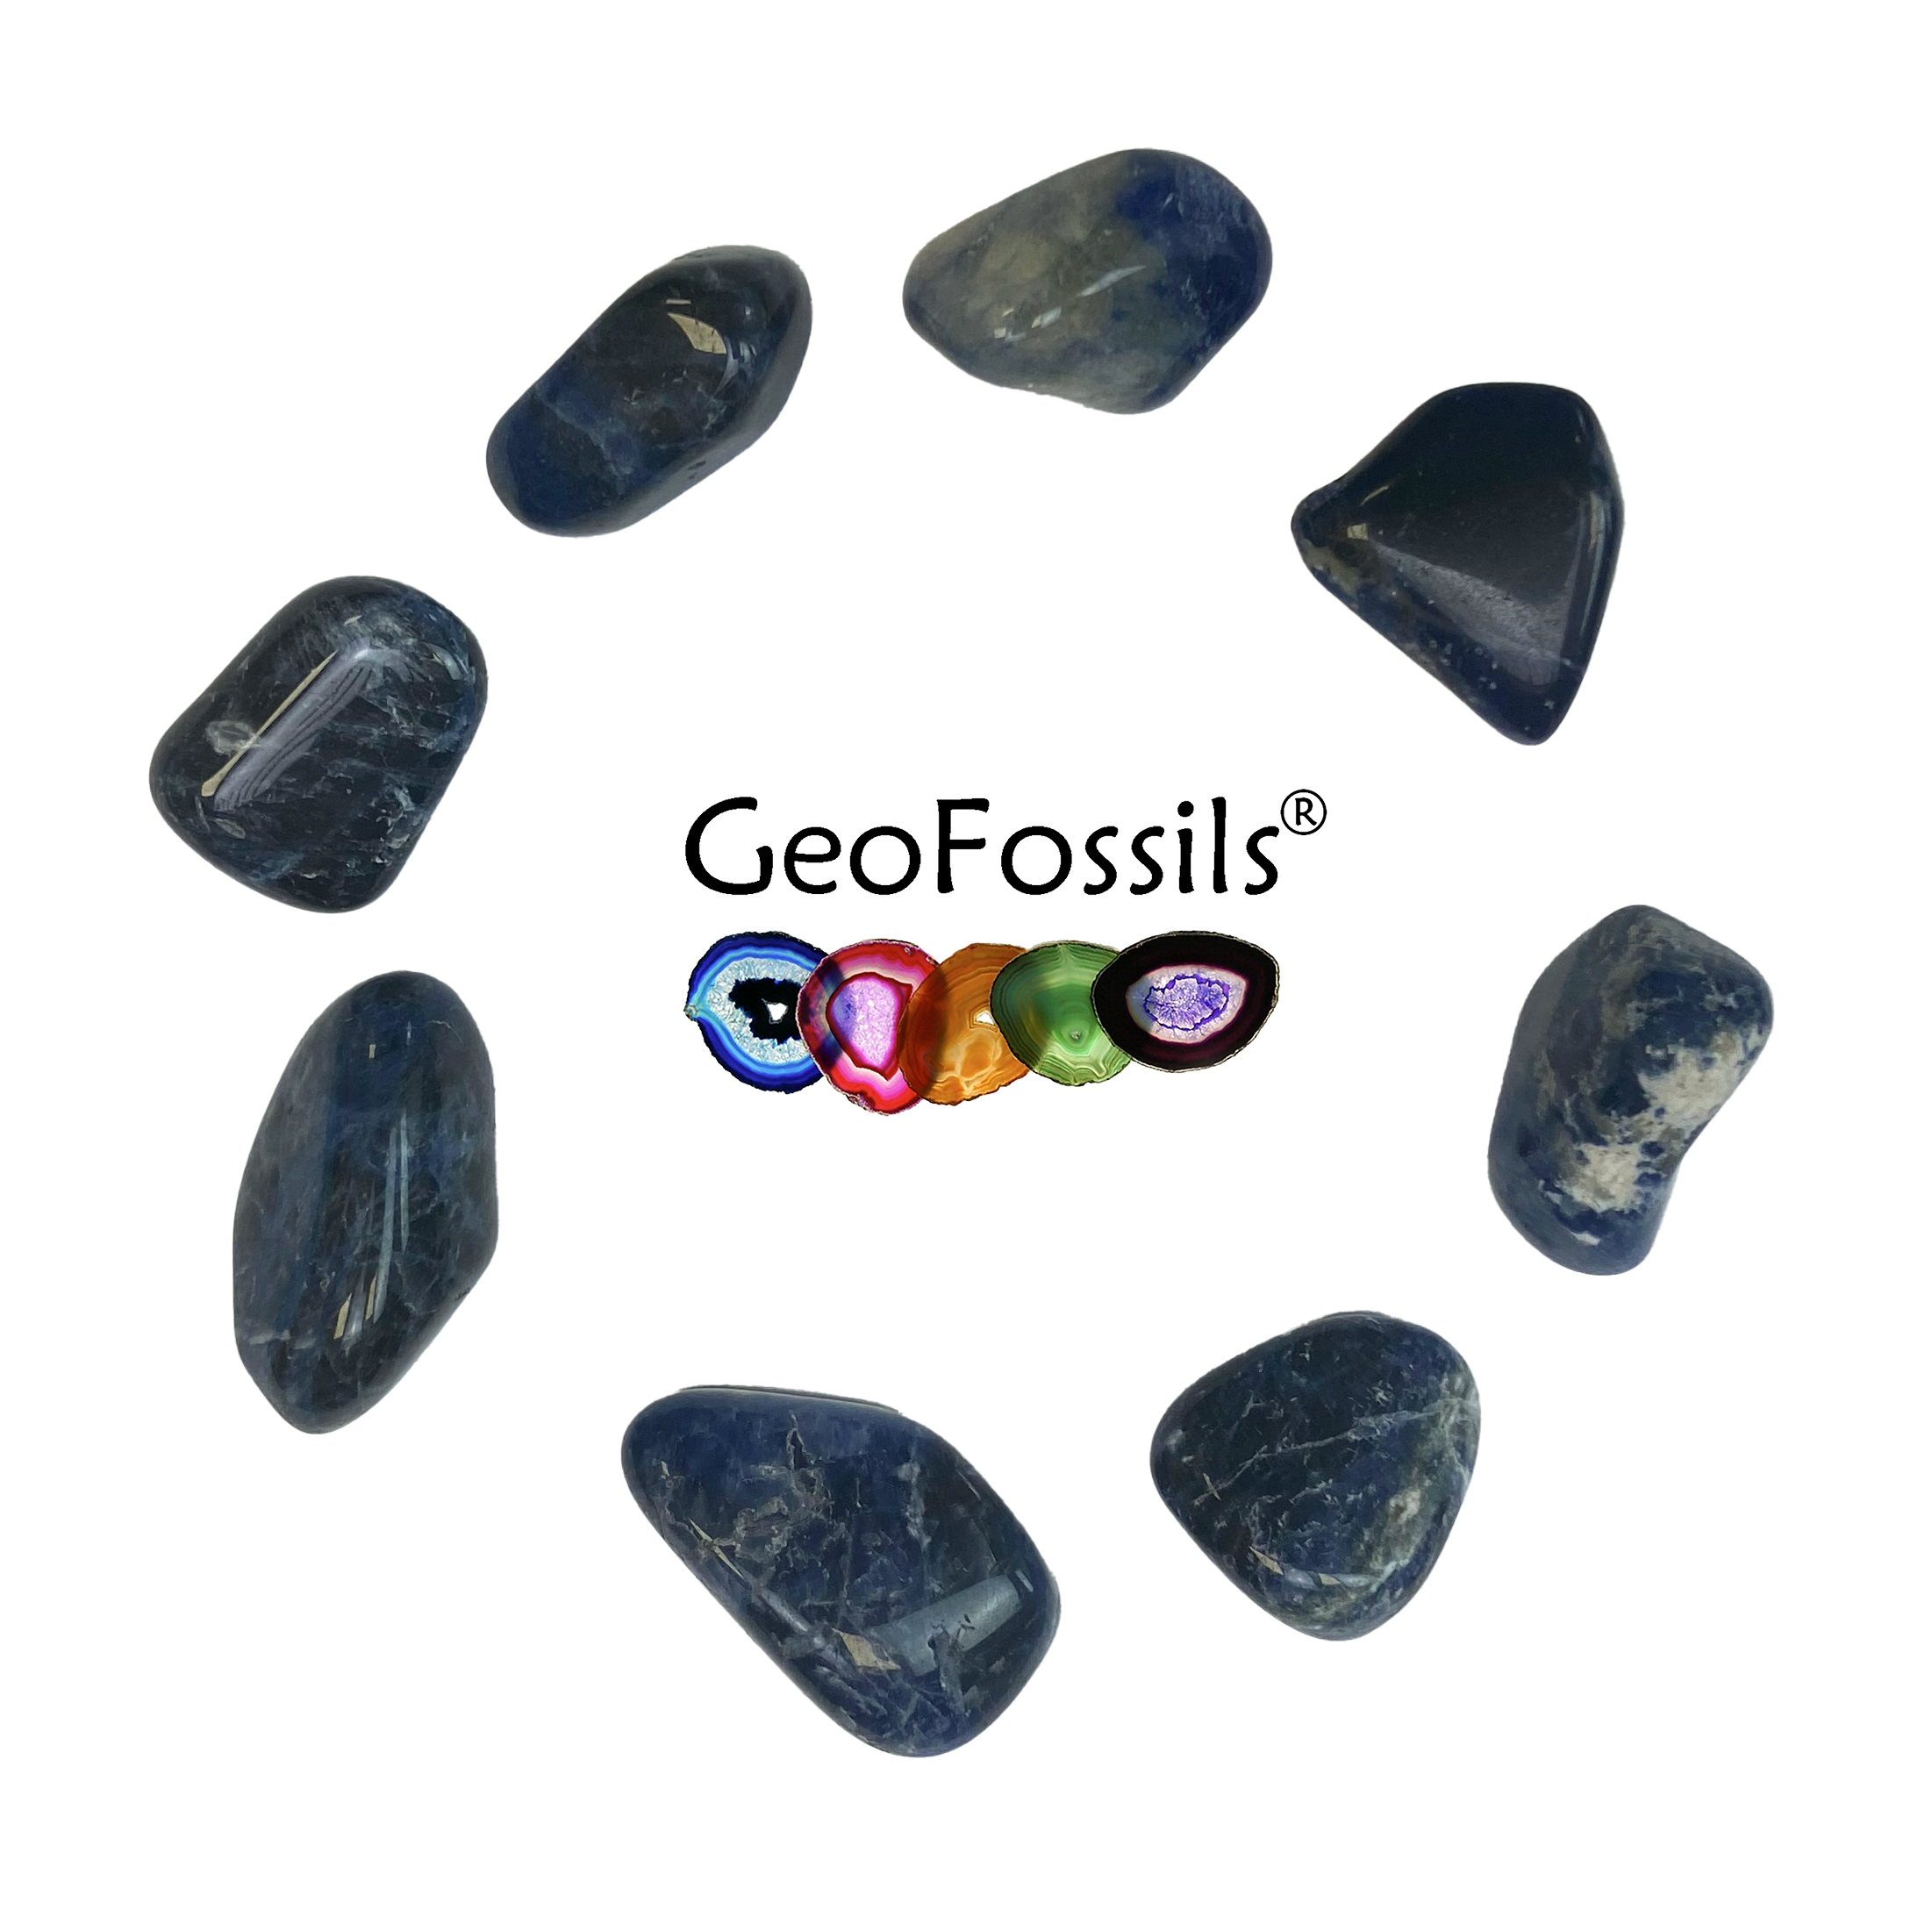 Geofossils Sodalite Polished Tumble Stone Healing Crystals